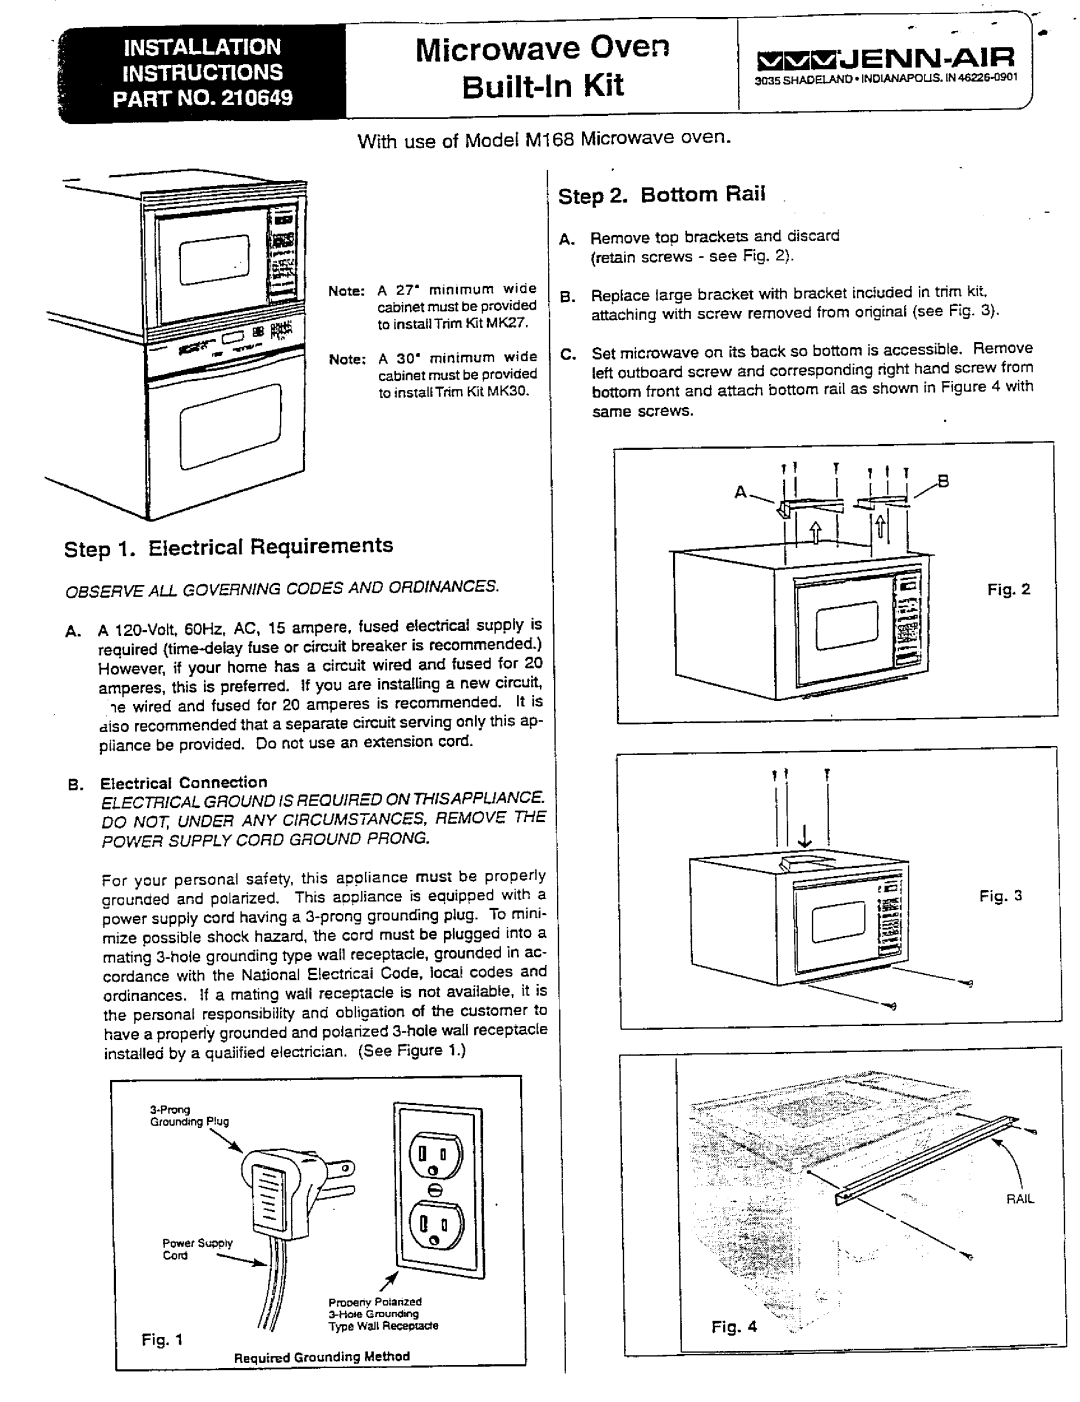 Jenn-Air MK24, A627, MK27, MK30 Installation Instructions Part No, Electrical Requirements, Microwave Oven, Built-InKit 